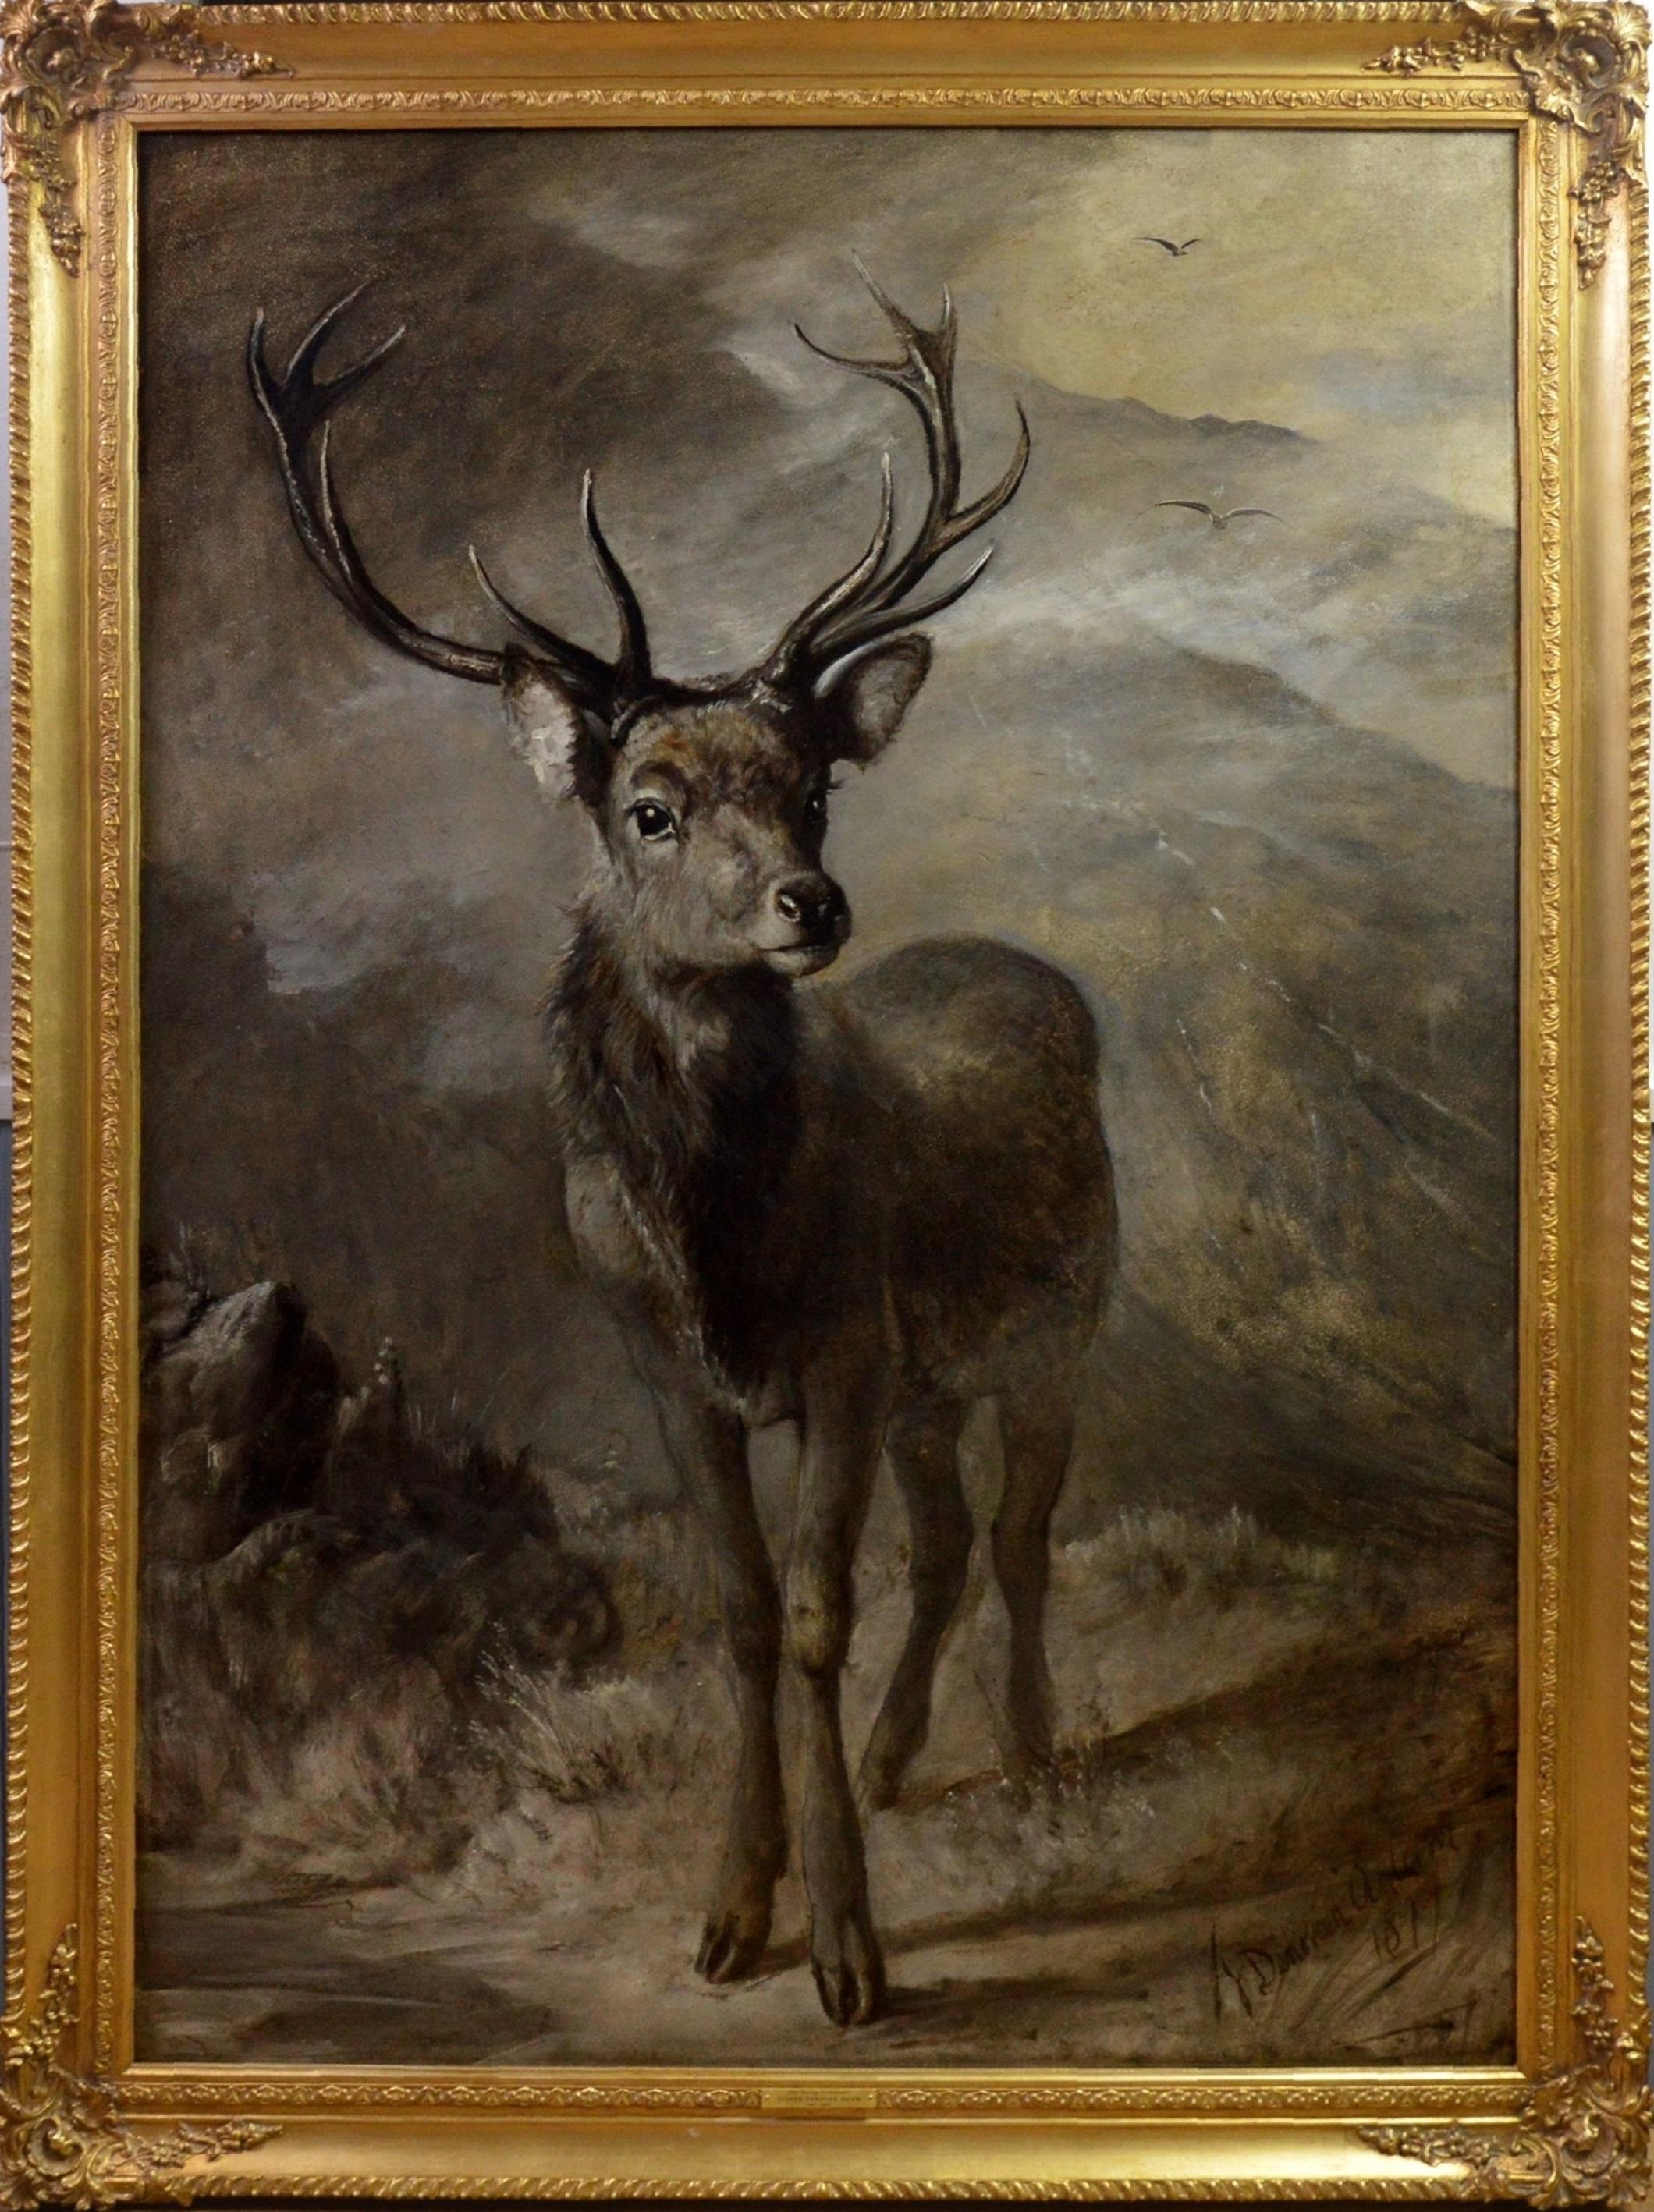 Joseph Denovan Adam Landscape Painting - The Young Pretender - Huge 19th Century Scottish Oil Painting of Highland Stag